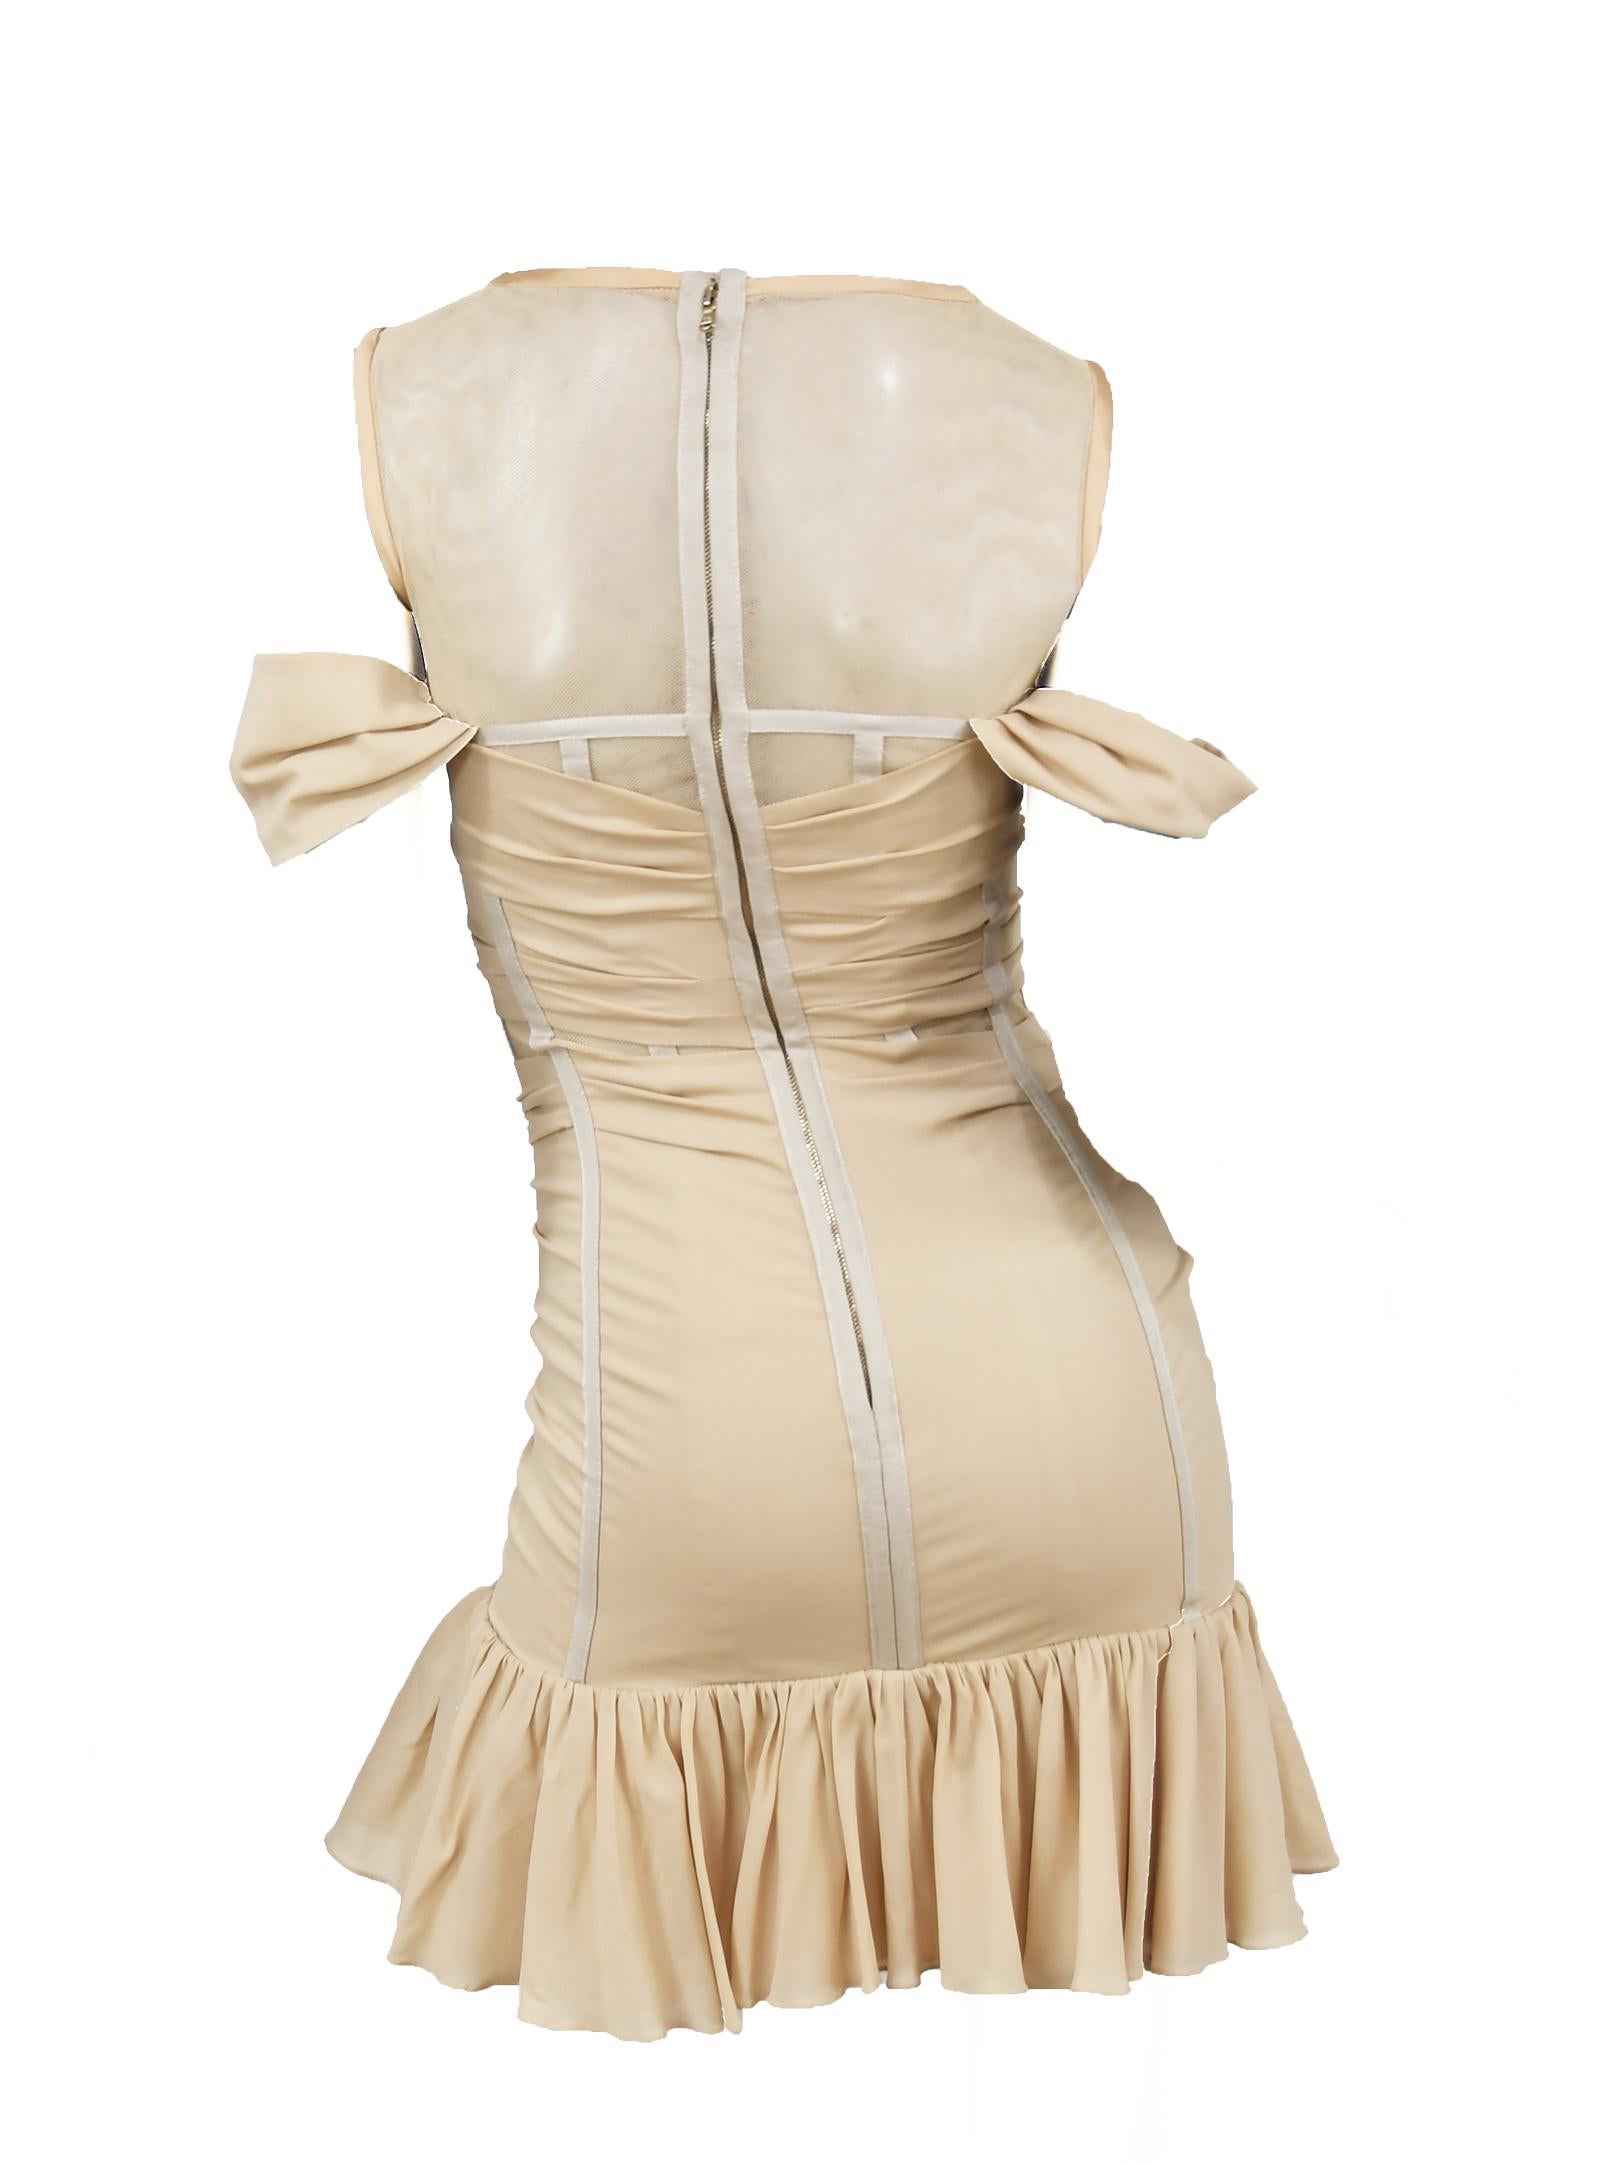 Fun and flirty nude Dolce & Gabbana mini dress.  Mesh bodice with exposed boning and silk ruffled skirt.  Perfect for a night out on the town.  Excellent used condition.